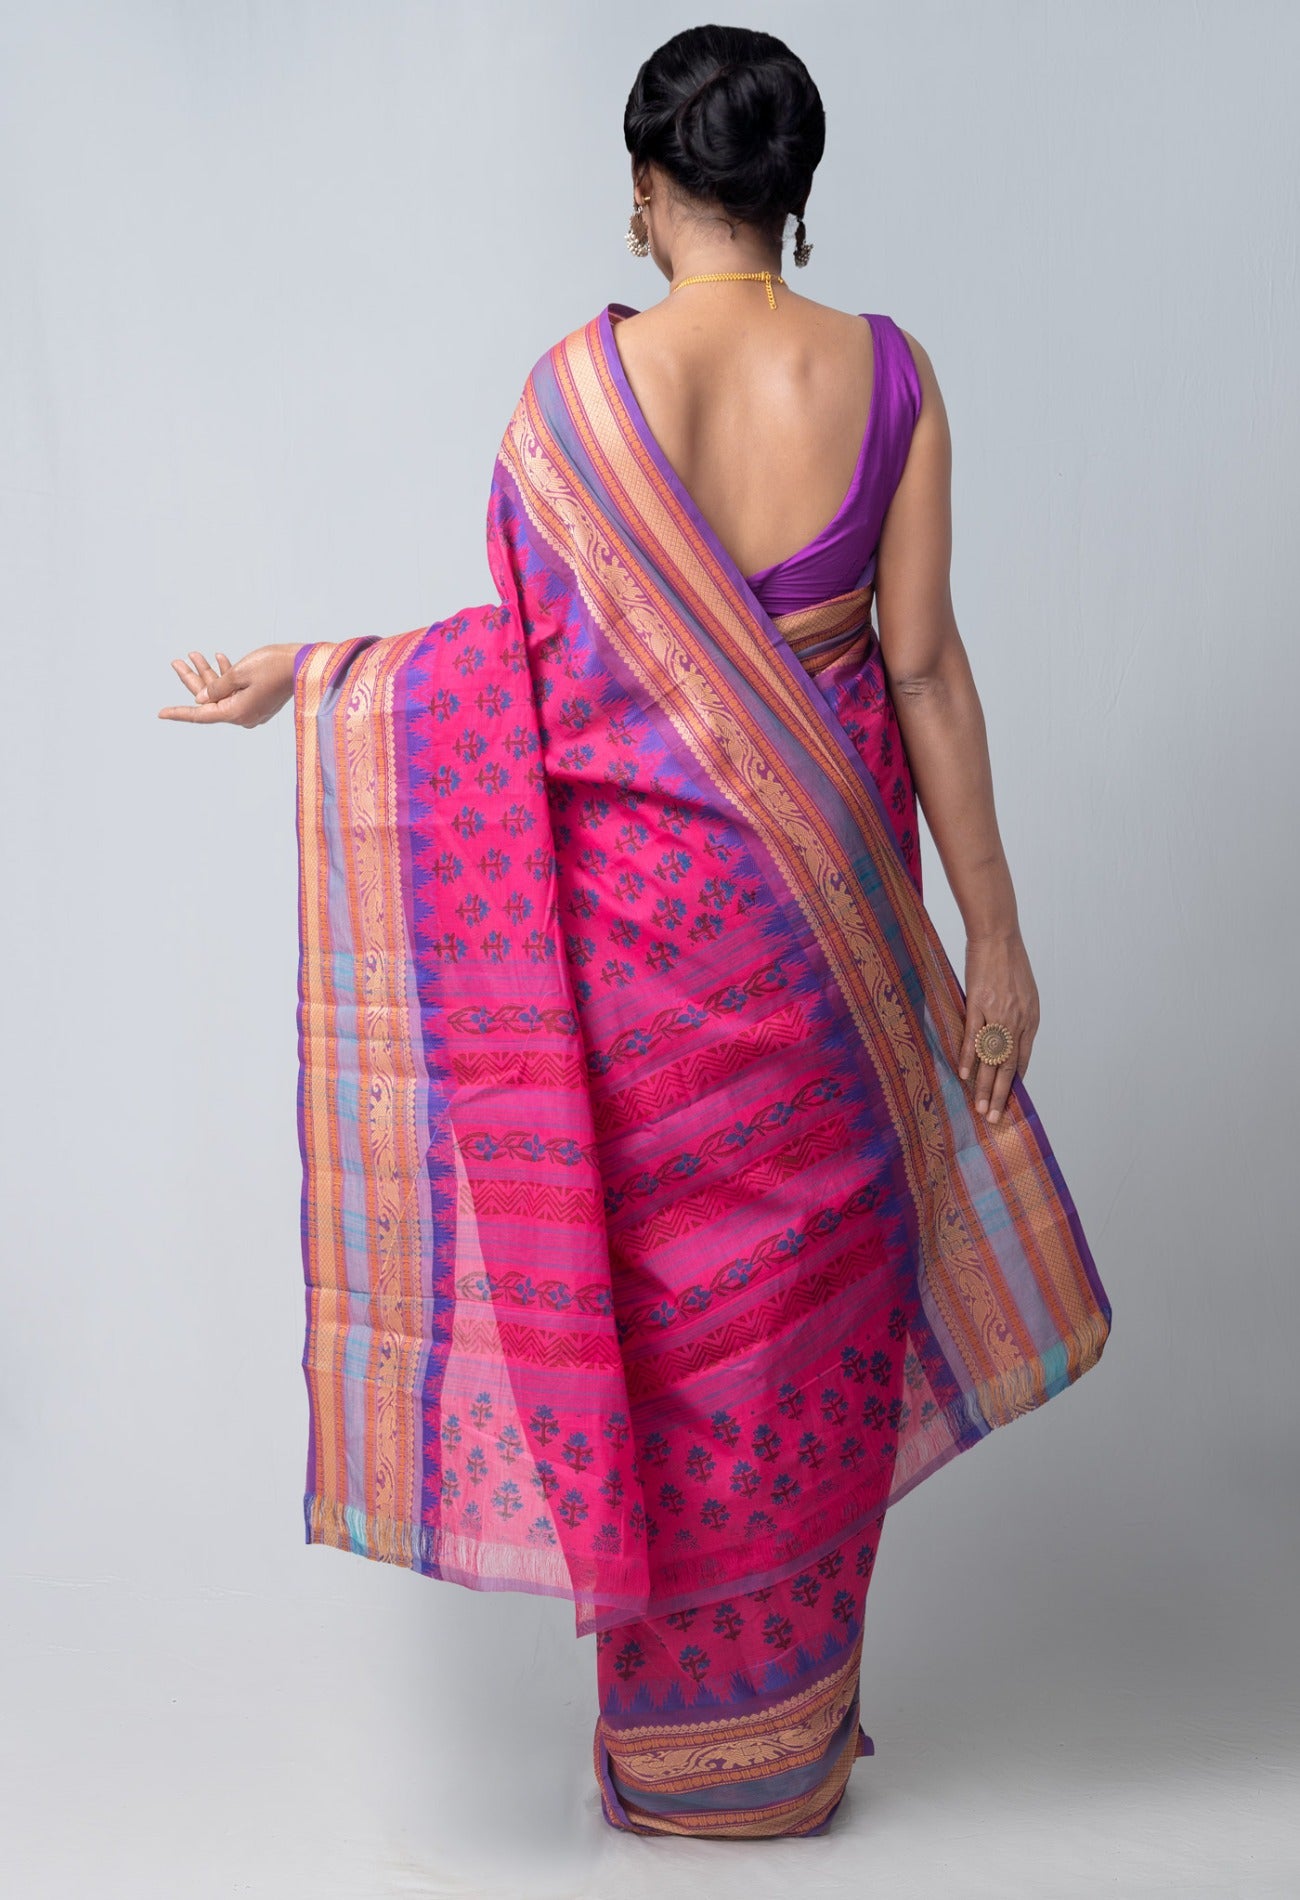 Online Shopping for Pink  Block Printed Kanchi Cotton Saree with Hand Block Prints from Tamil Nadu at Unnatisilks.com India
